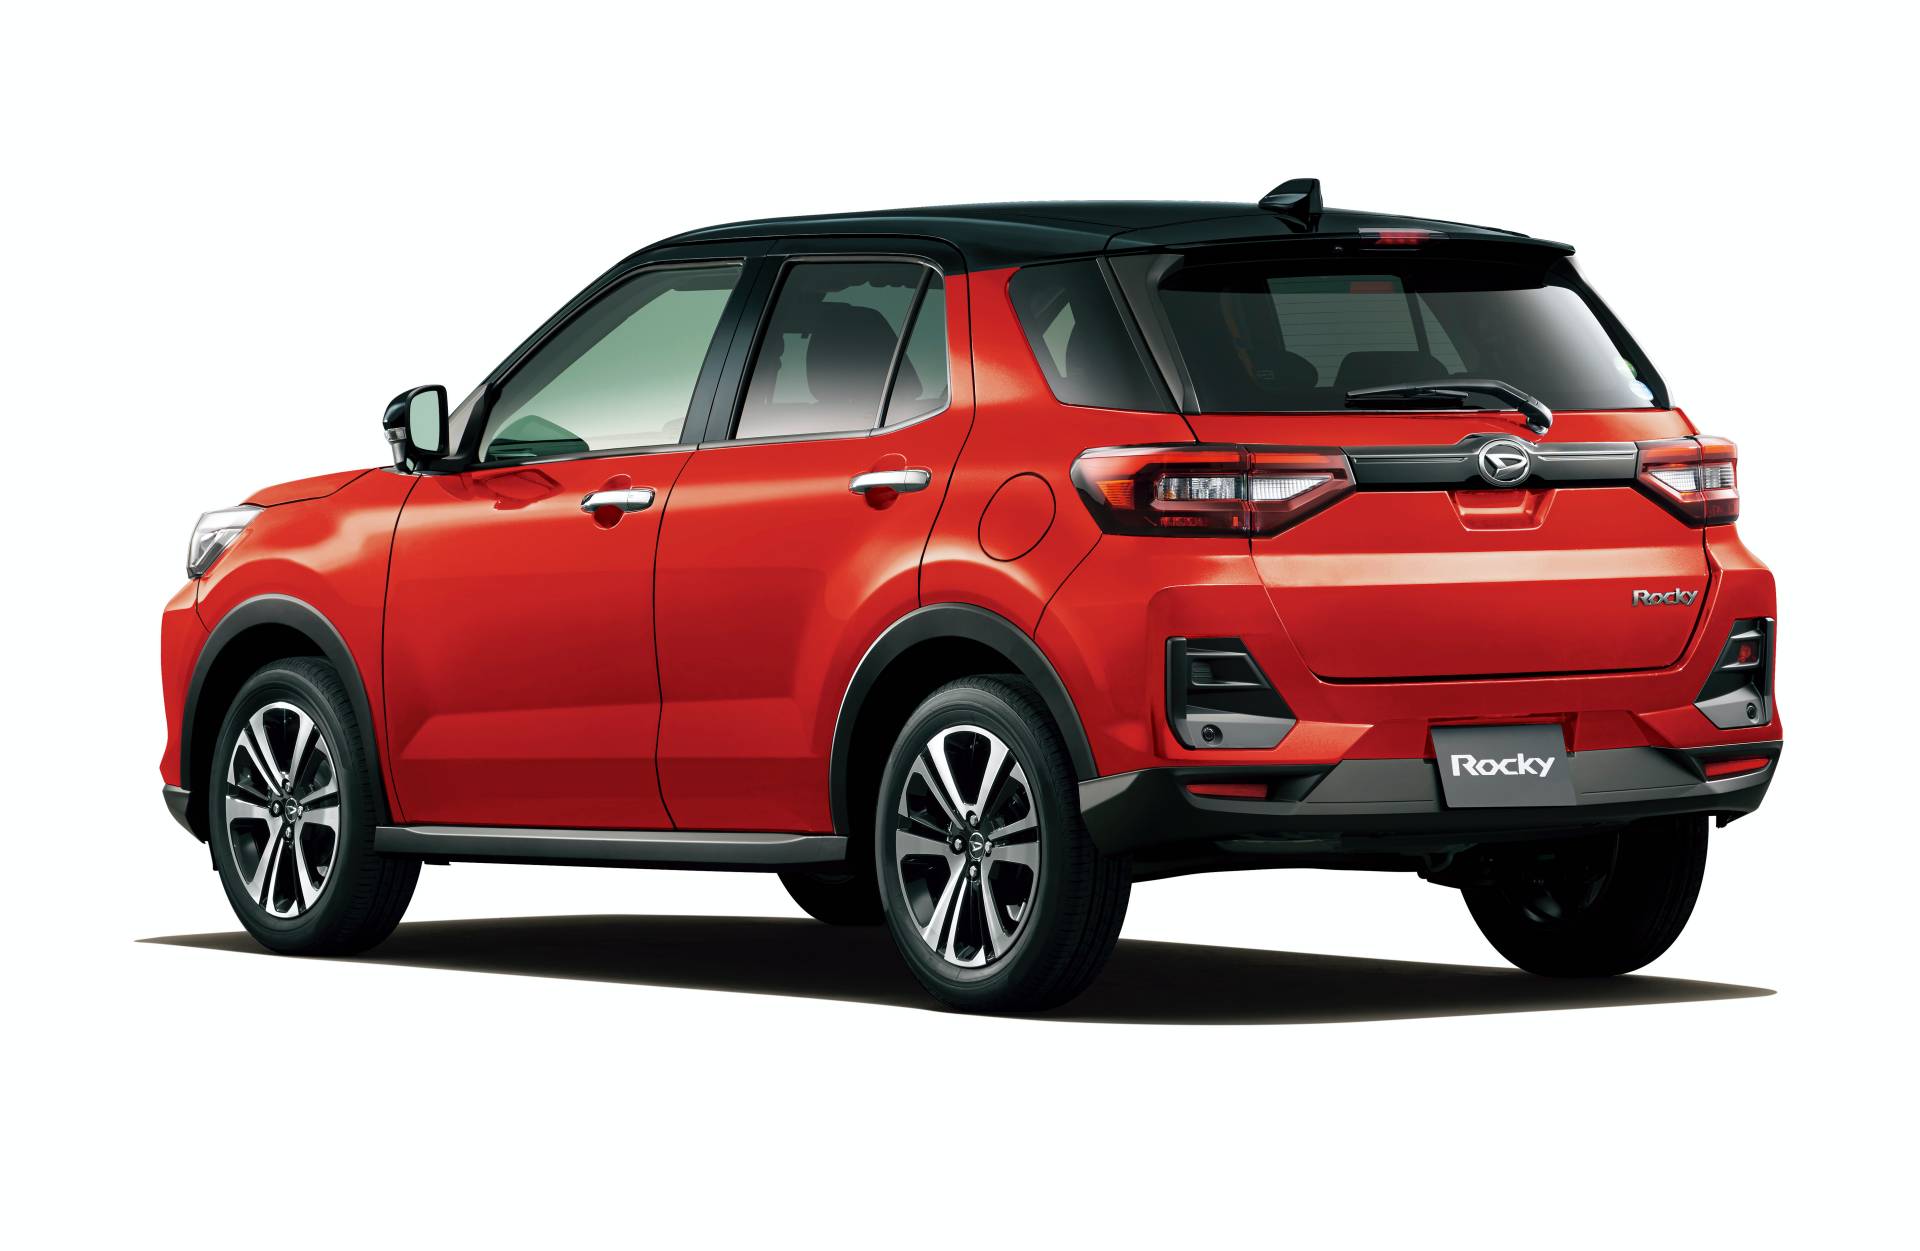 Daihatsu Rocky Launches In Japan With Factory Tuning Packs Carscoops